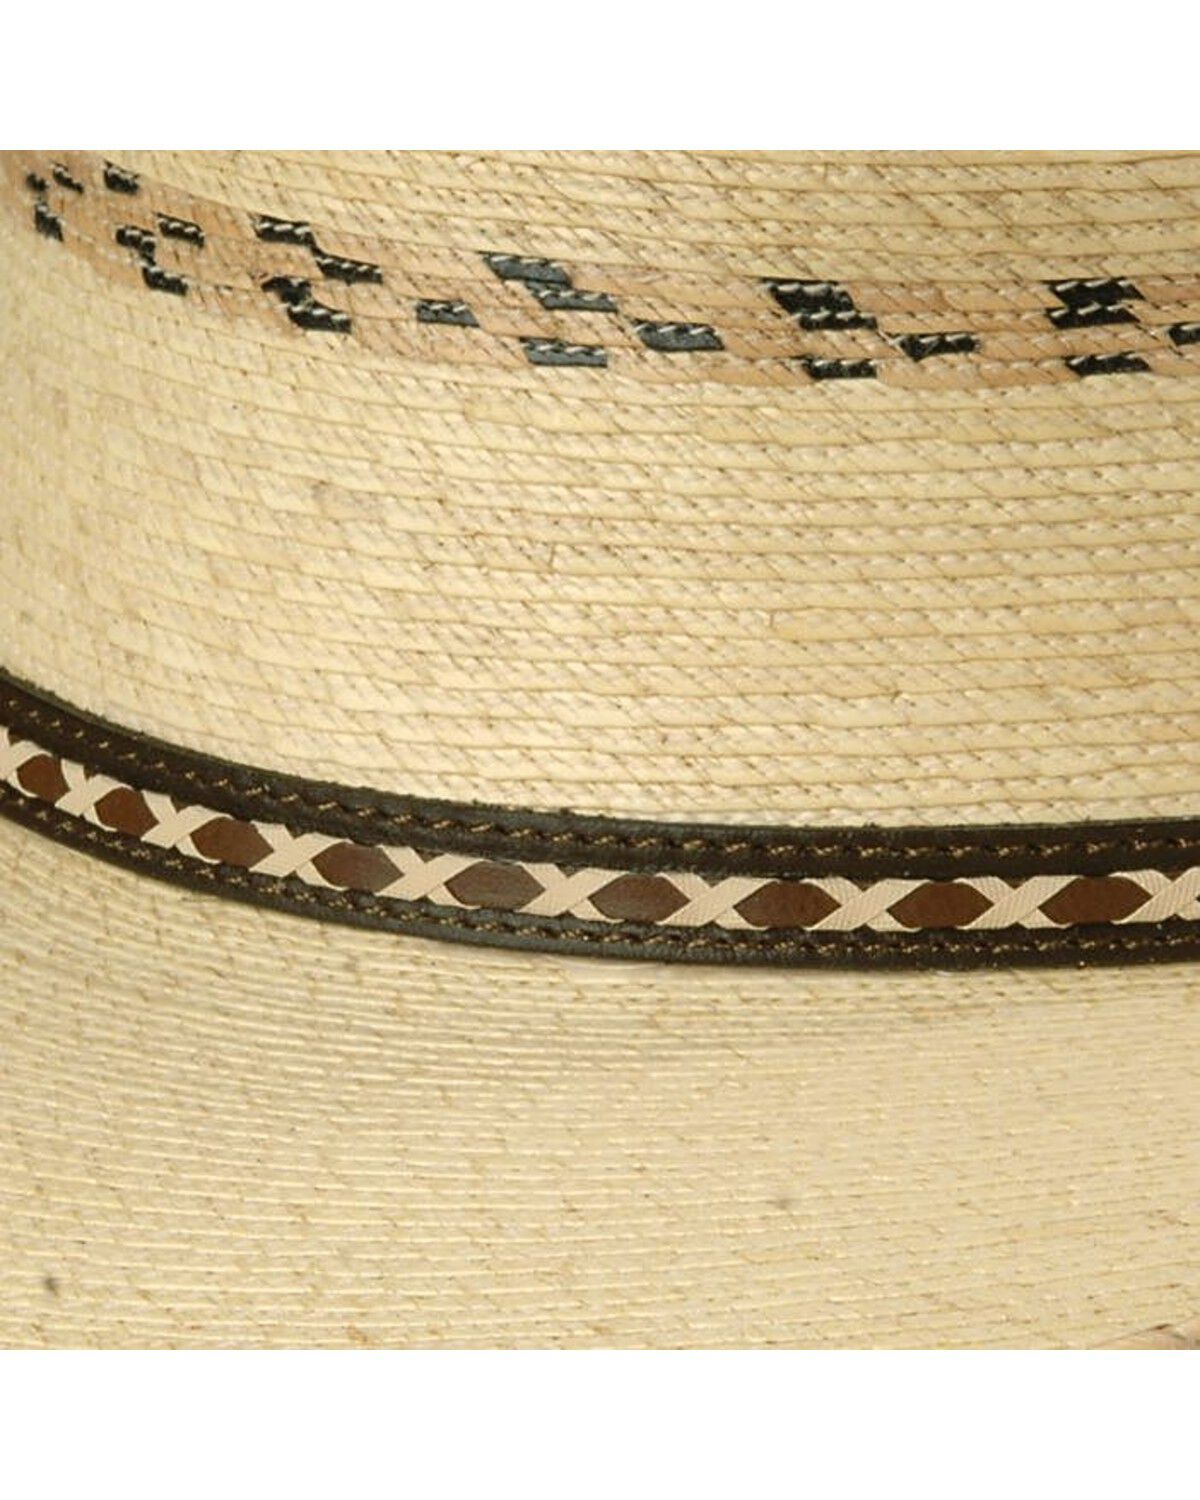 MS 7681PNCO-BLK Larry Mahan 30X Pancho Gus Palm Straw Western Hat 